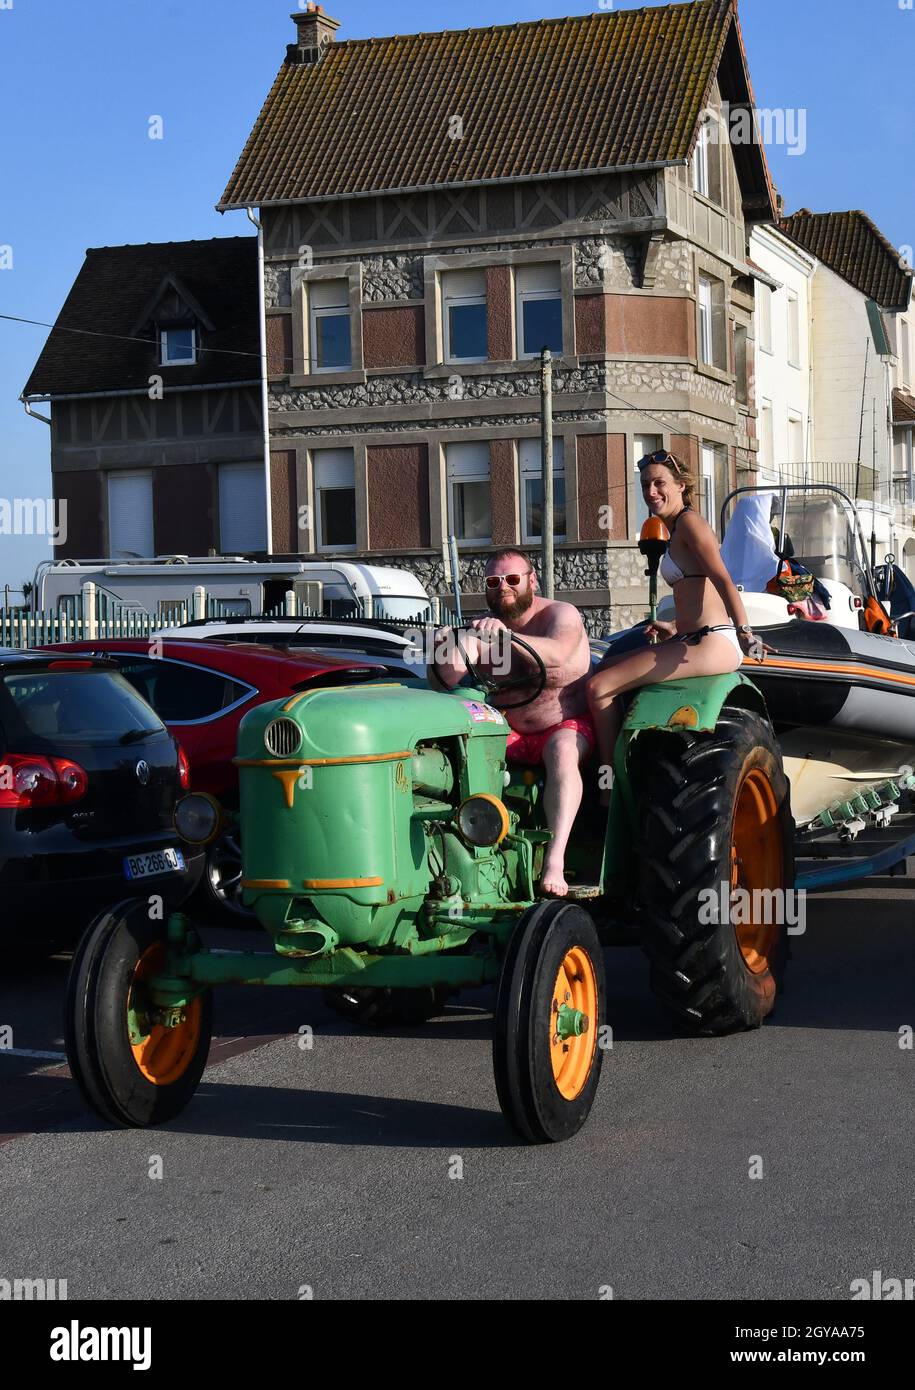 Ambleteuse on Cote d'Opale Northern France man and woman on fishermans tractor wearing bikini and shorts Stock Photo